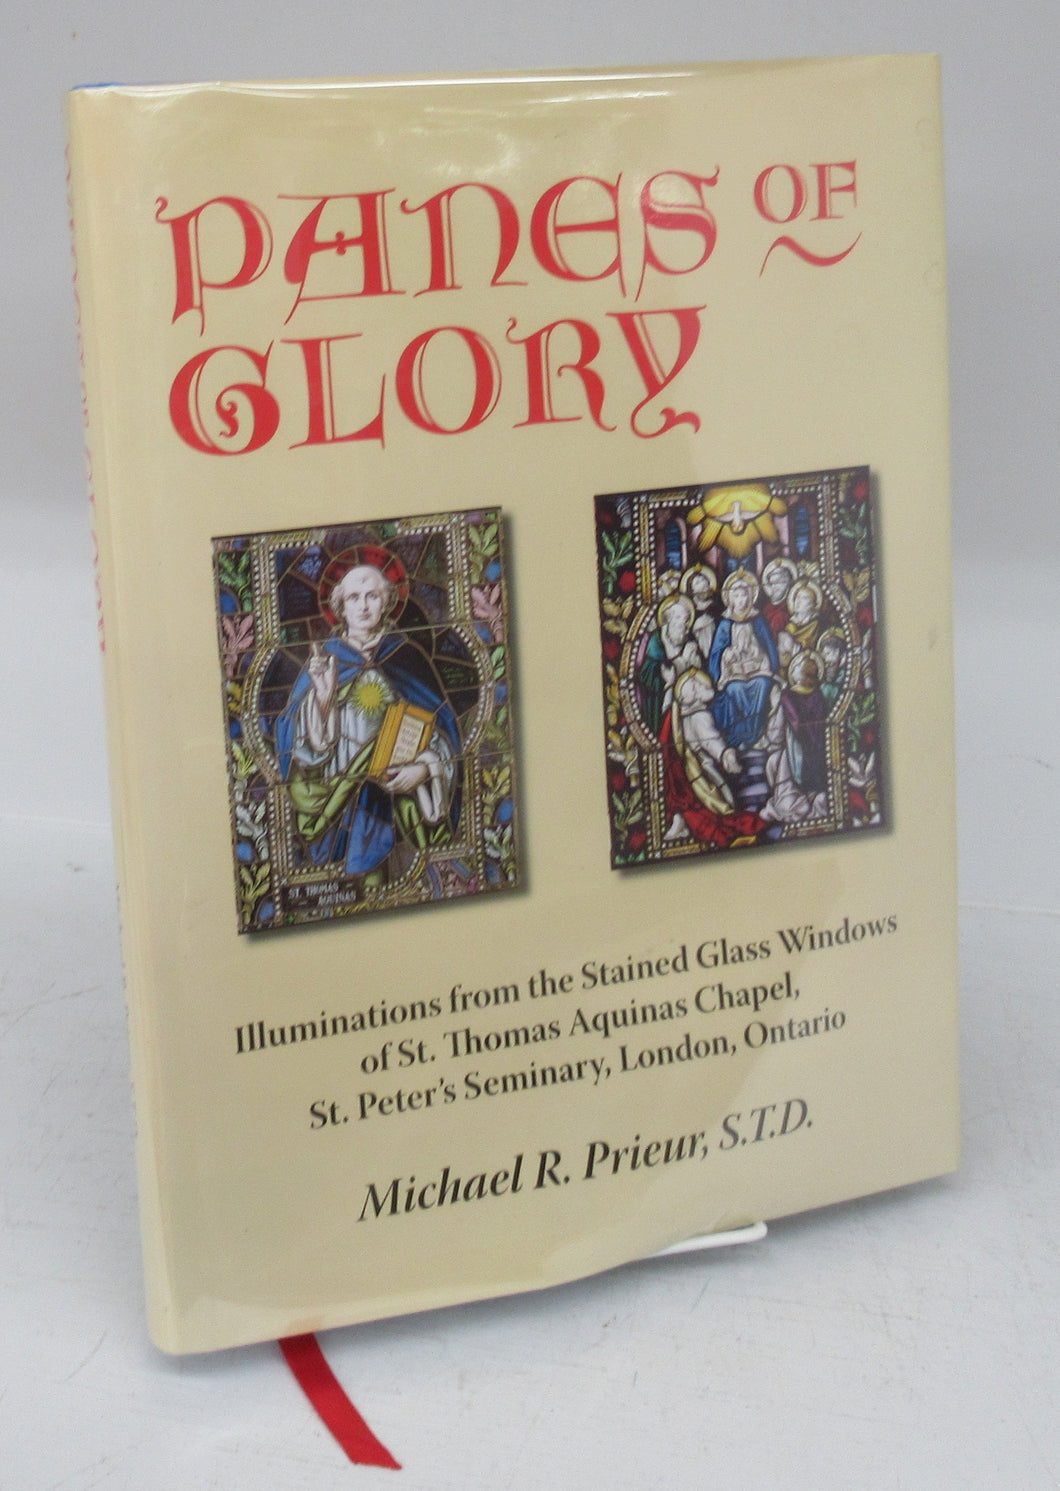 Panes of Glory: Illuminations from the Stained Glass Windows of St. Thomas Aquinas Chapel, St. Peter's Seminary, London, Ontario